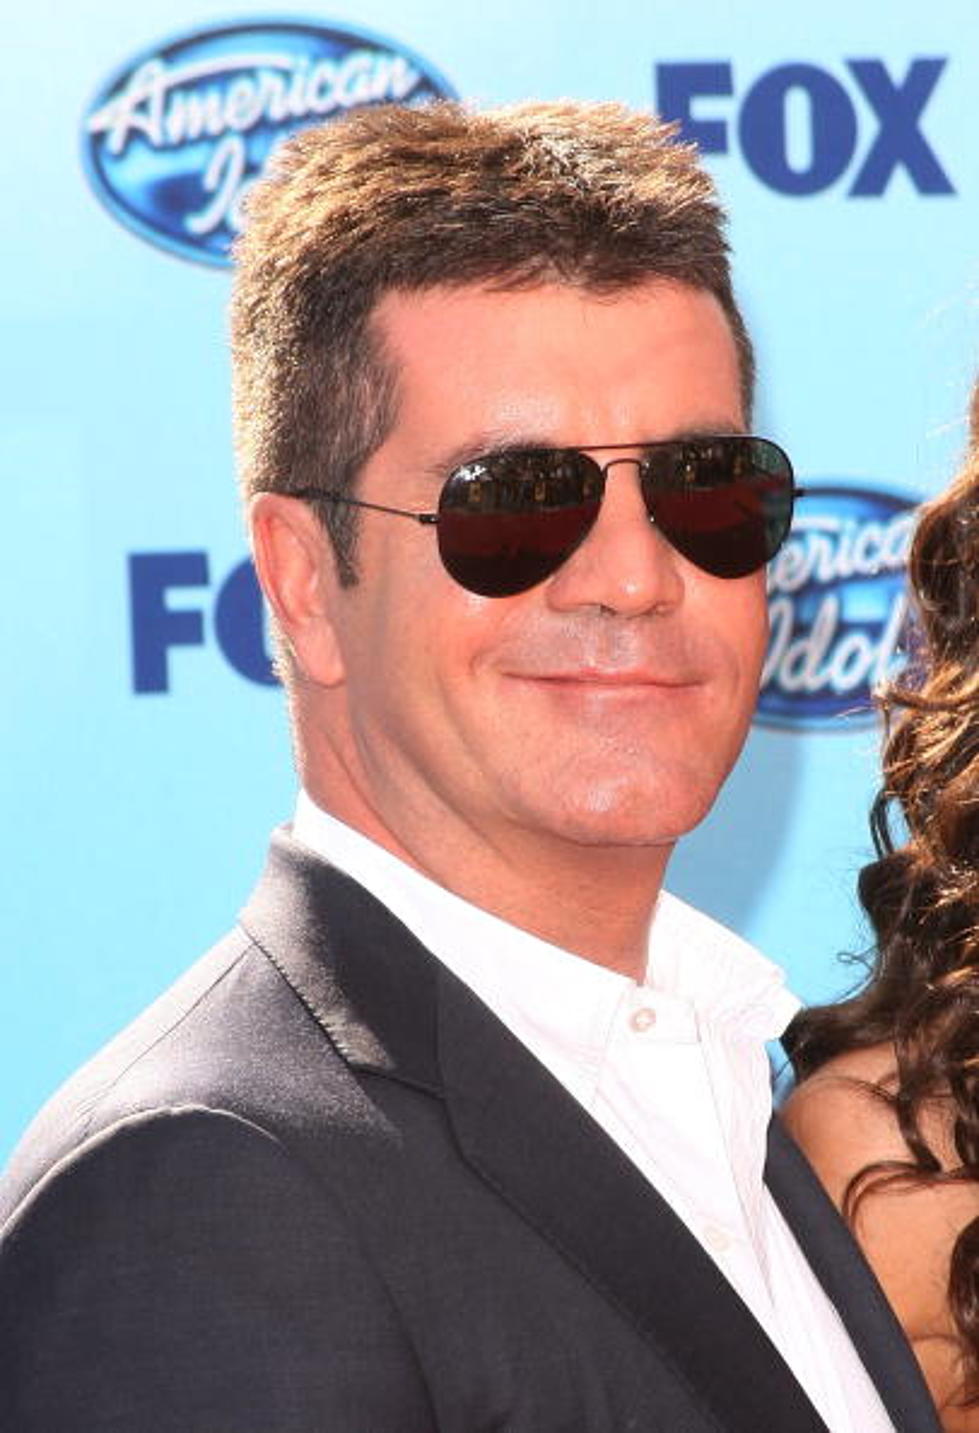 Simon Cowell Puts In Audition Studios For “X Factor”